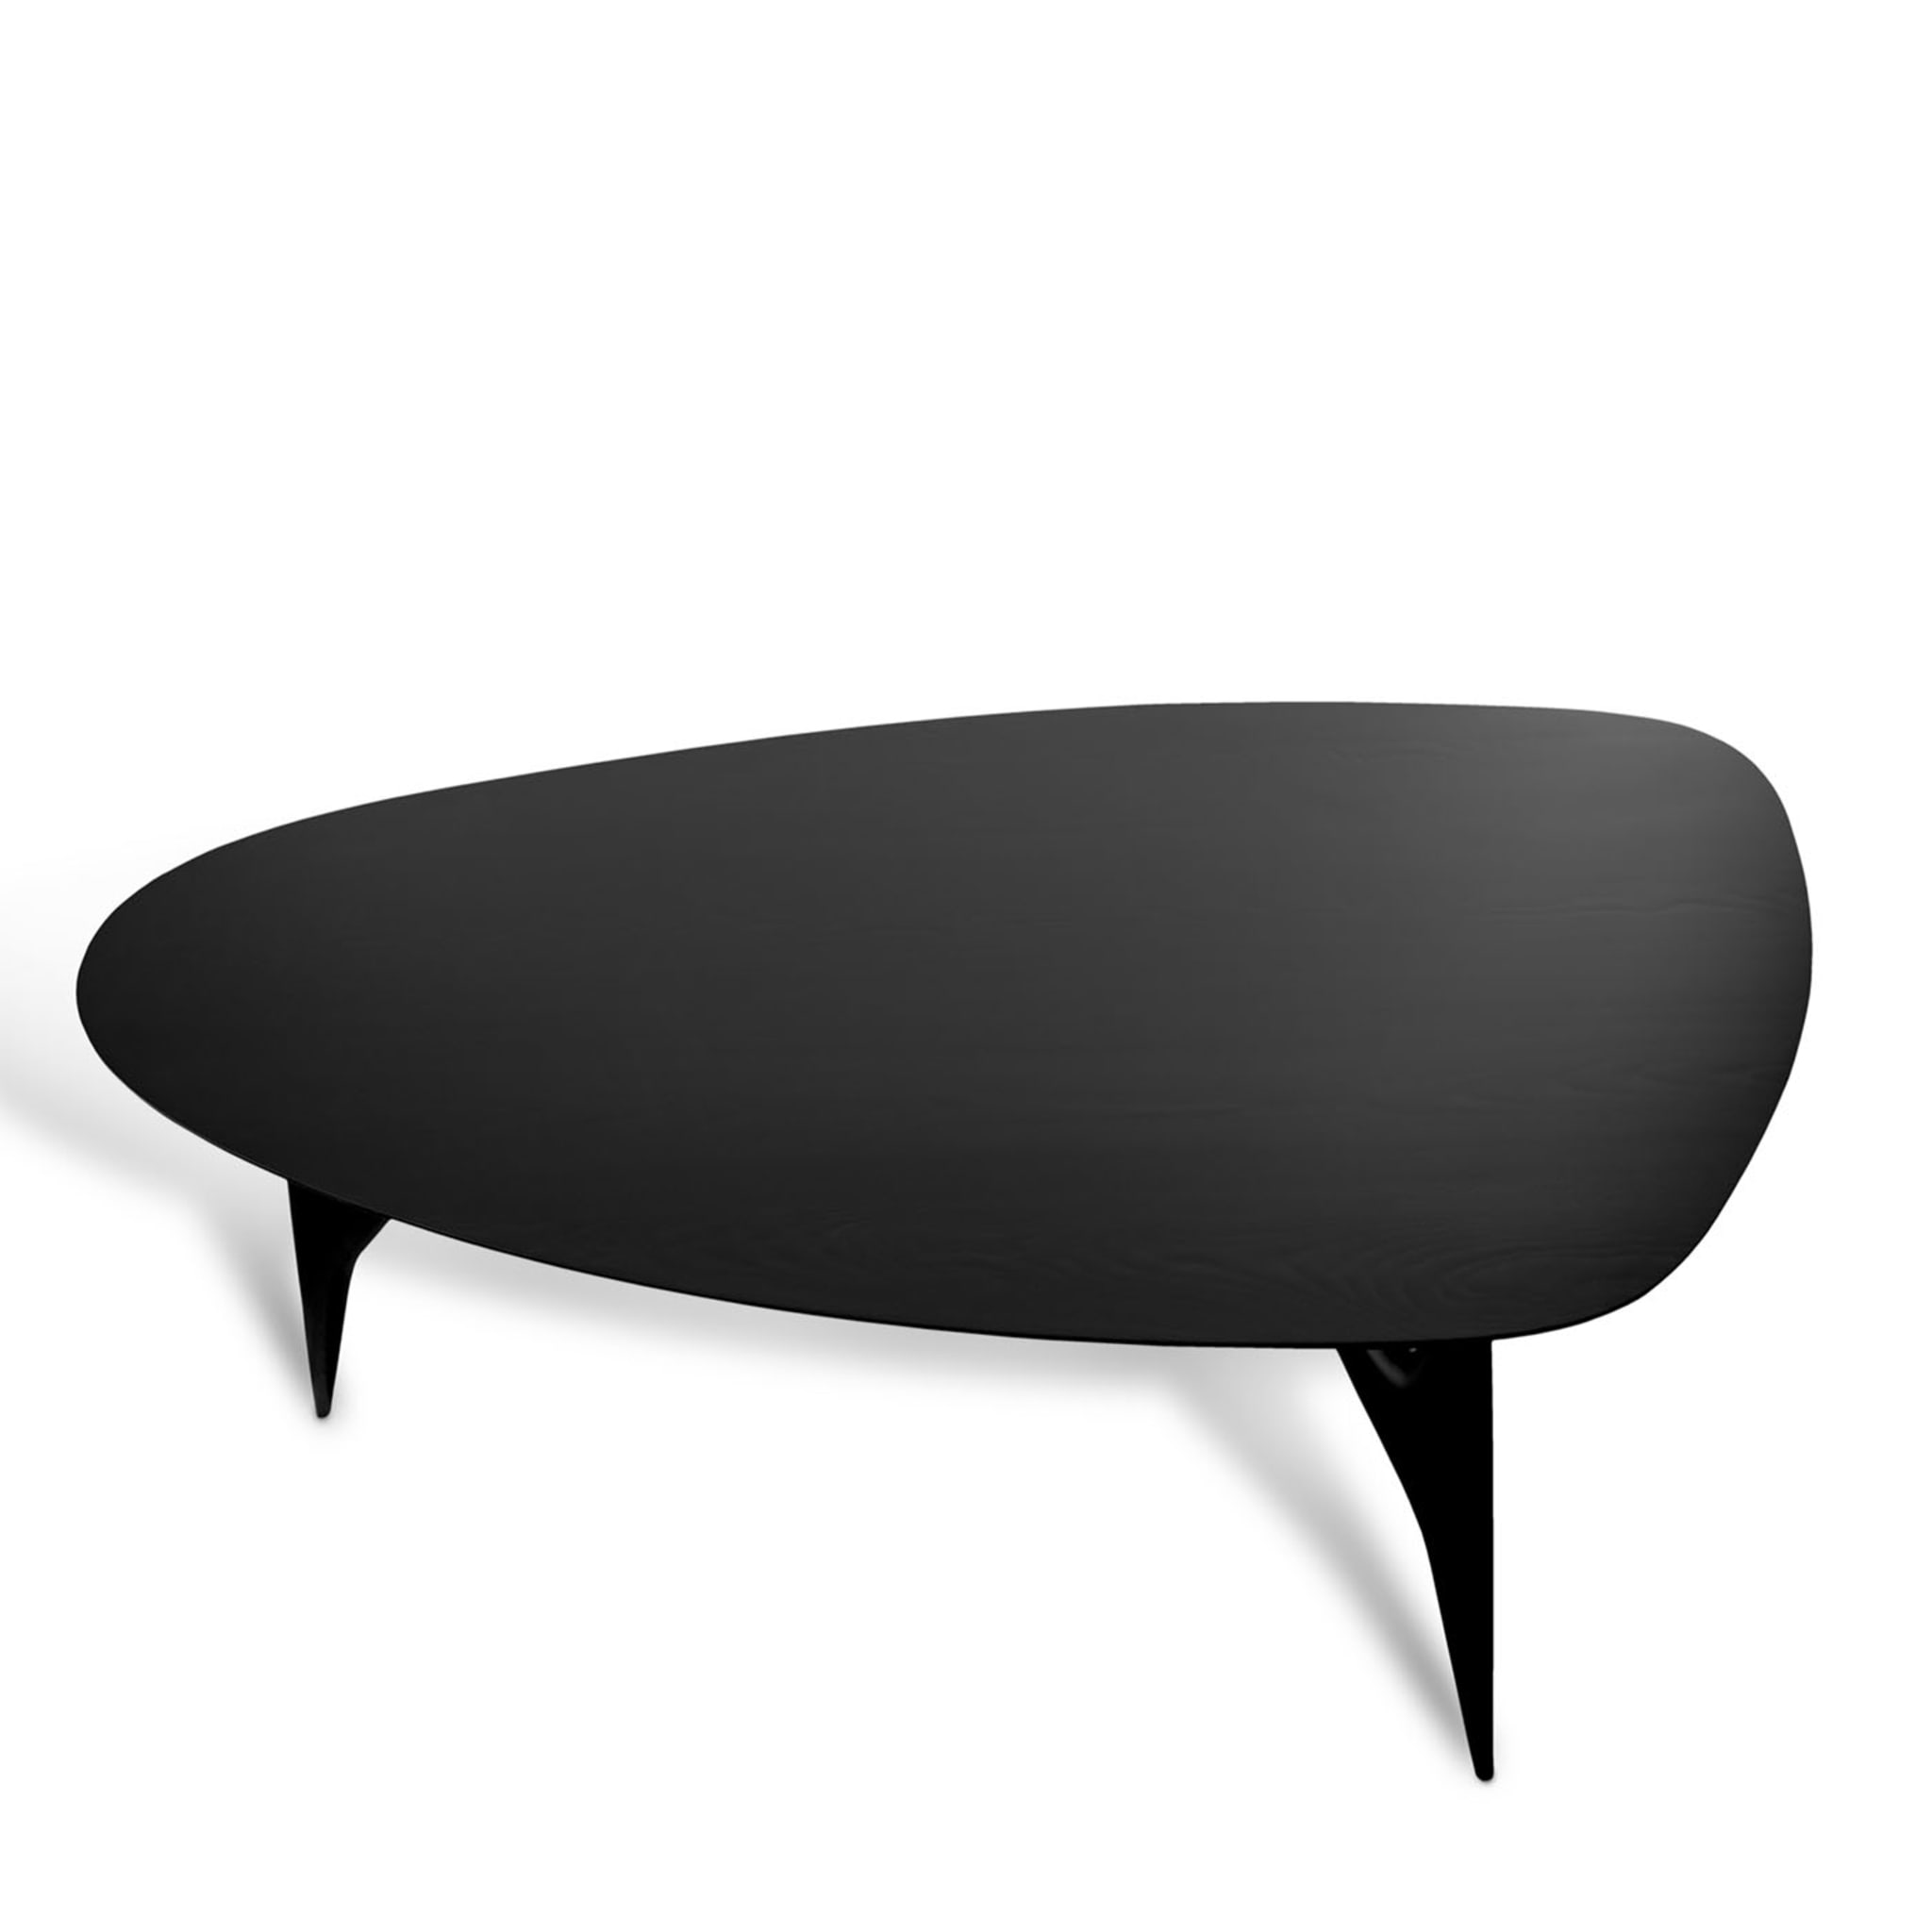 Ted Masterpiece Black Large Table - Alternative view 1